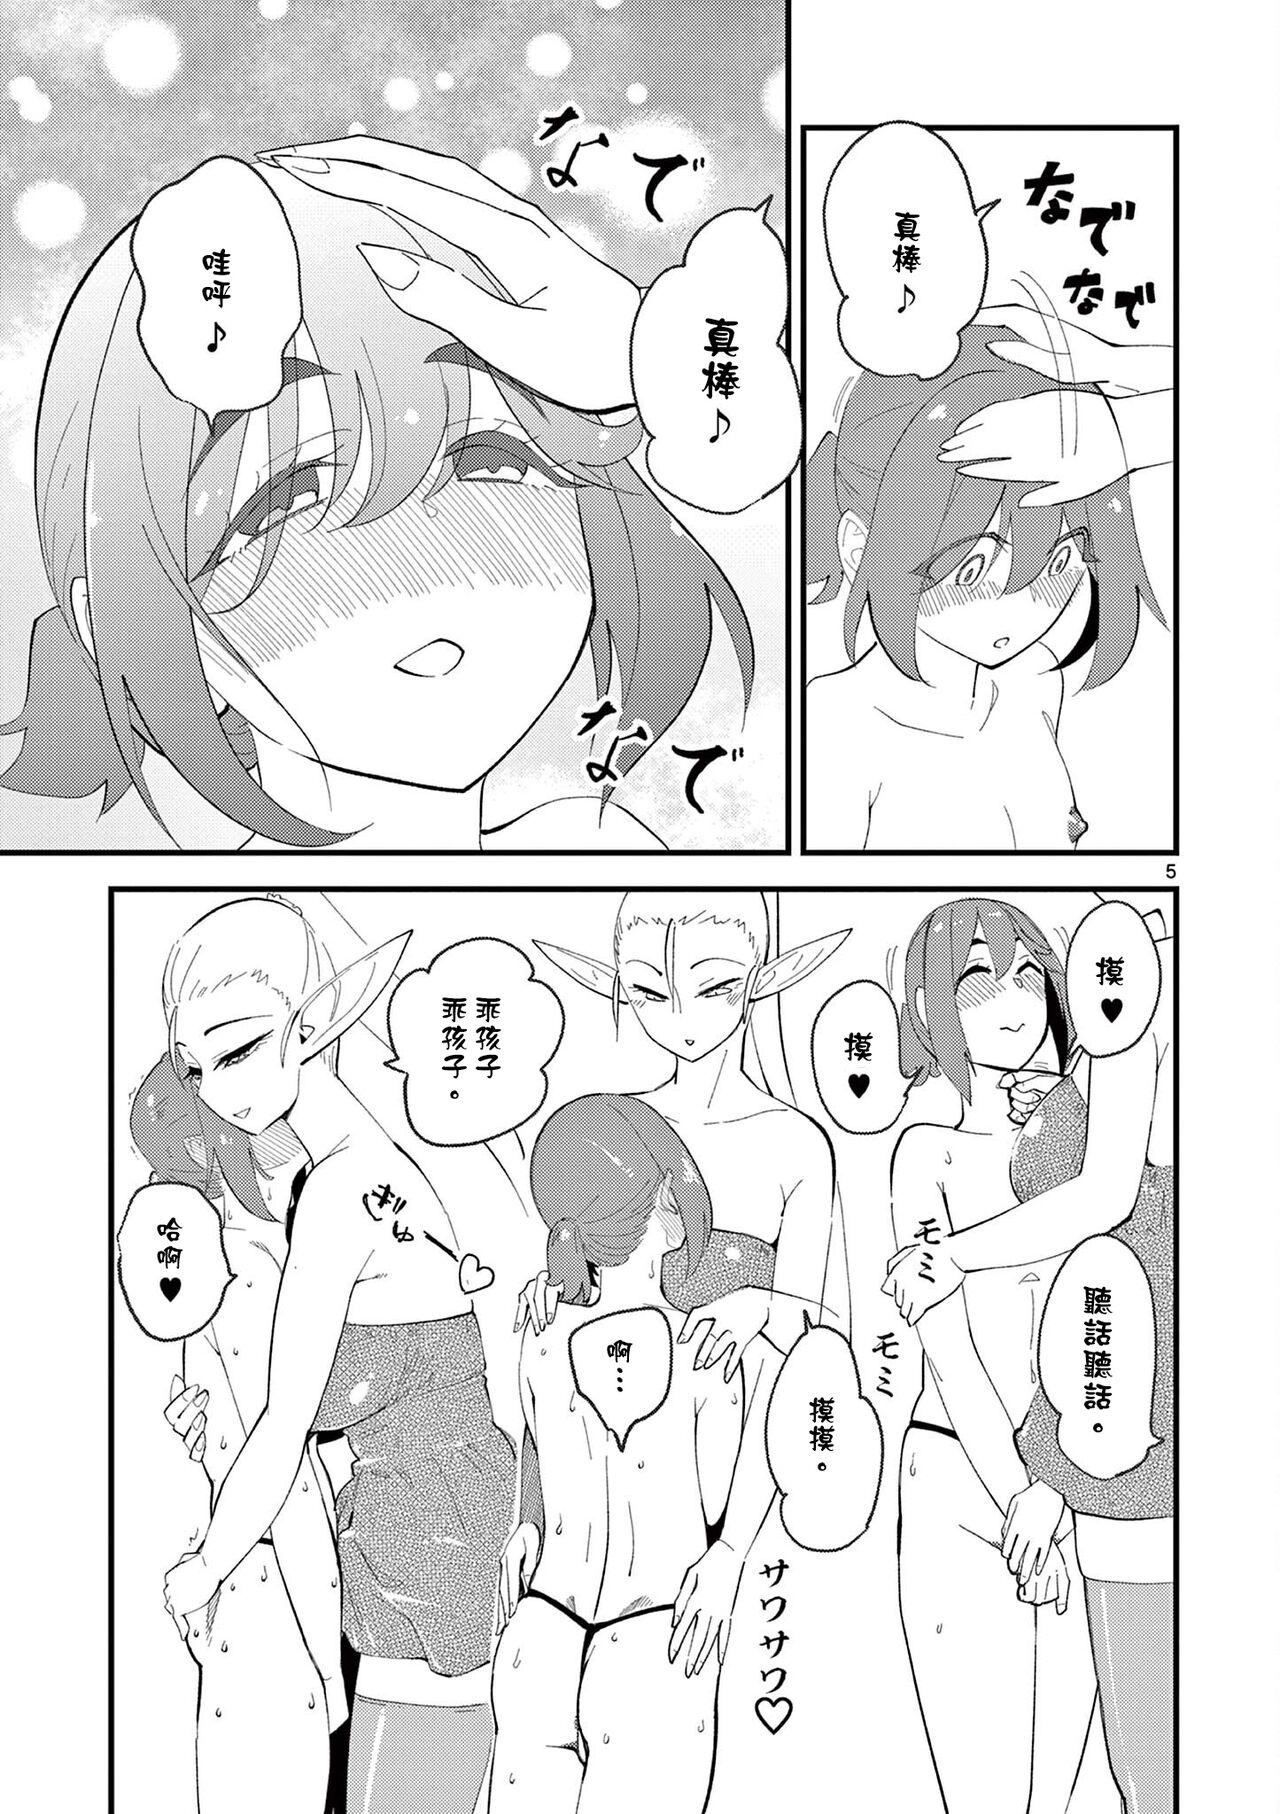 Best Blowjobs Ever 精靈女王大人！ch6 Peitos - Page 6